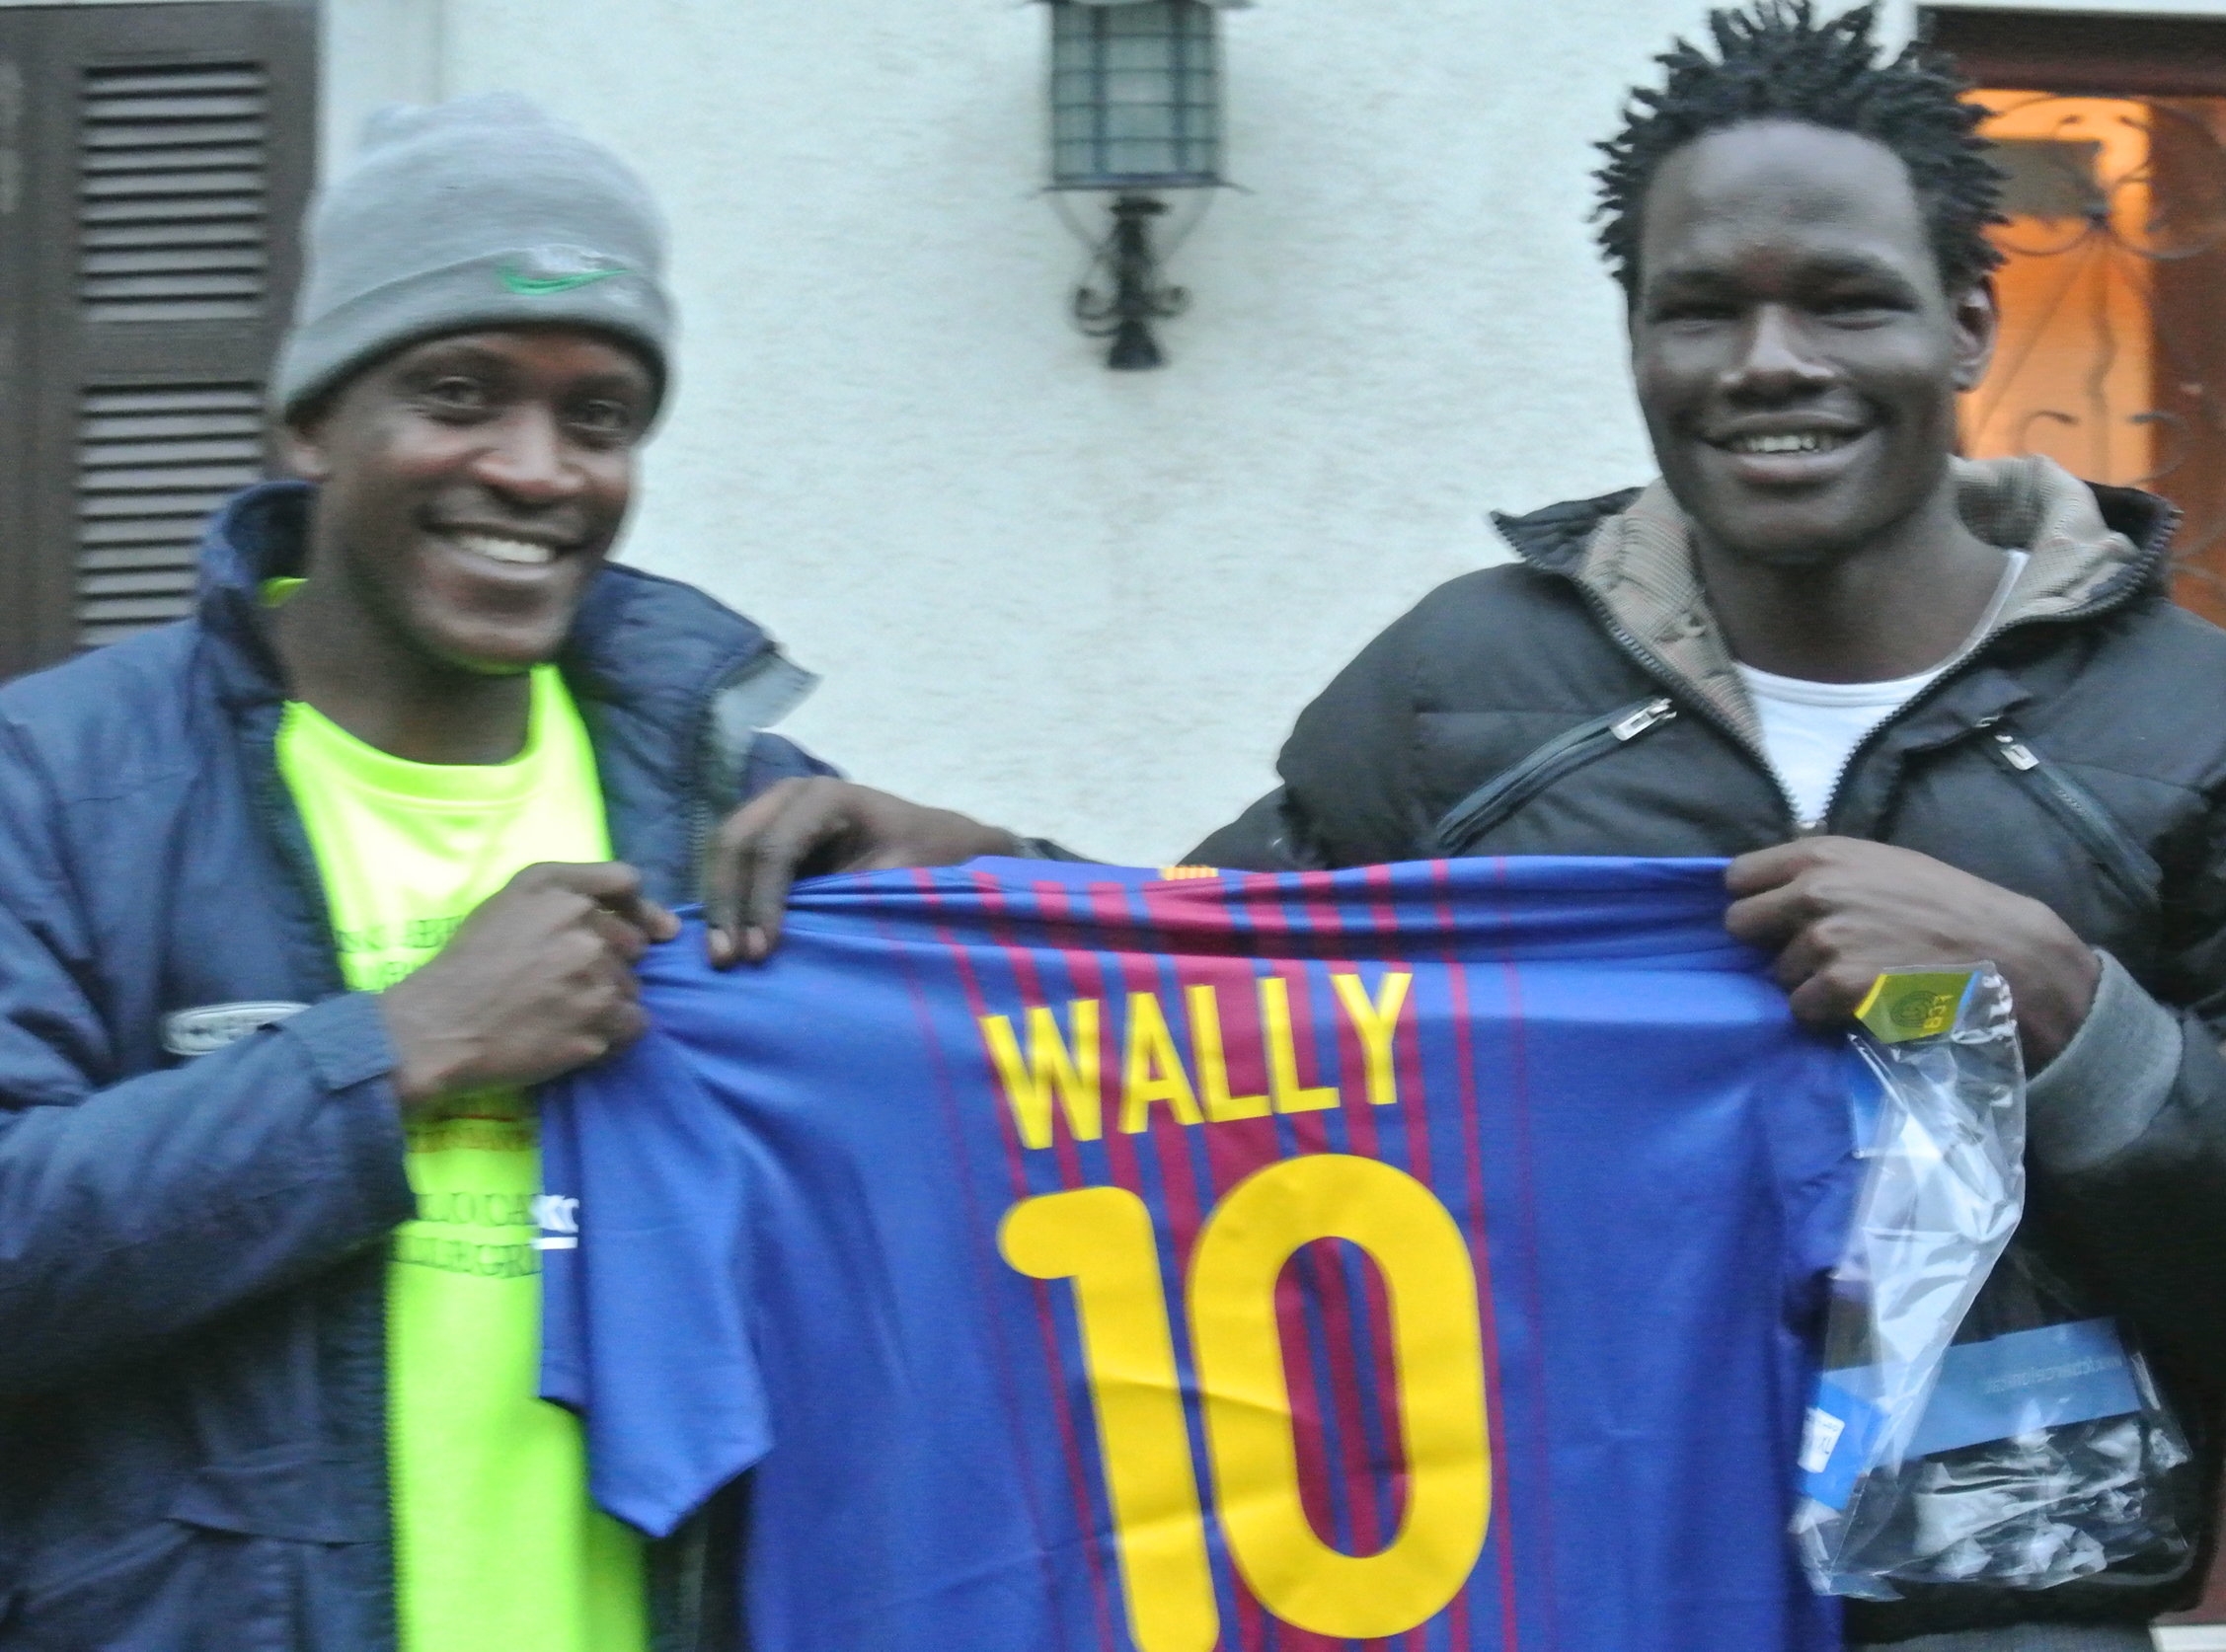  Sama (L) with Wally (R) and his Barca jersey at their housing in Bergamo province, November 2017. 